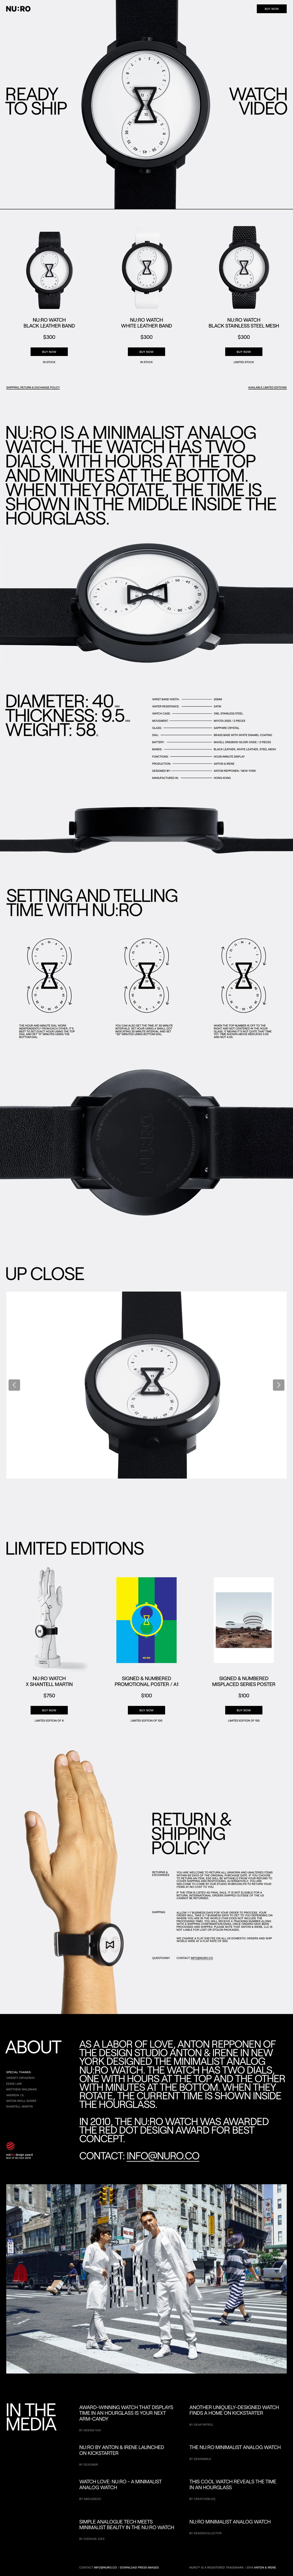 NU:RO Landing Page Example: NU:RO is a Minimalist Analog Watch. The watch has two dials, with hours at the top and minutes at the bottom. When they rotate, the time is shown in the middle inside the hourglass.